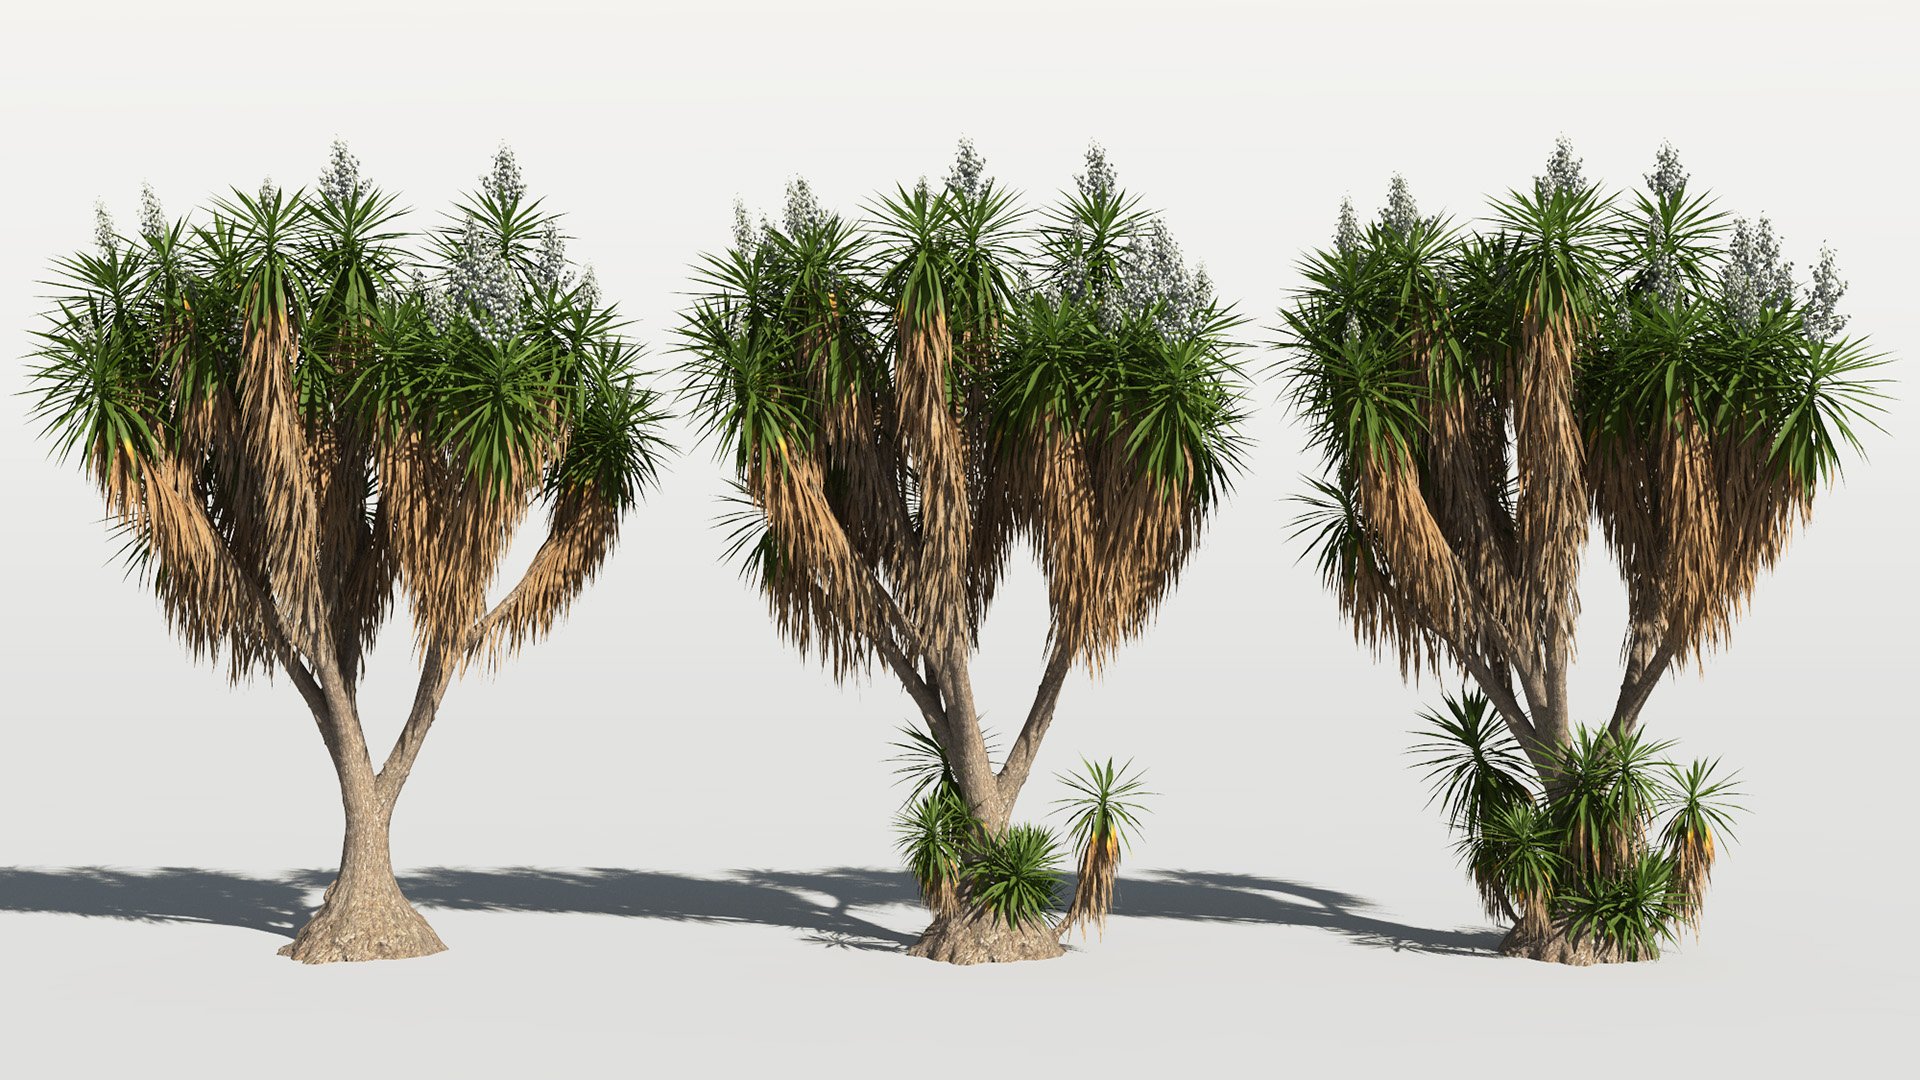 3D model of the Spineless yucca Yucca elephantipes